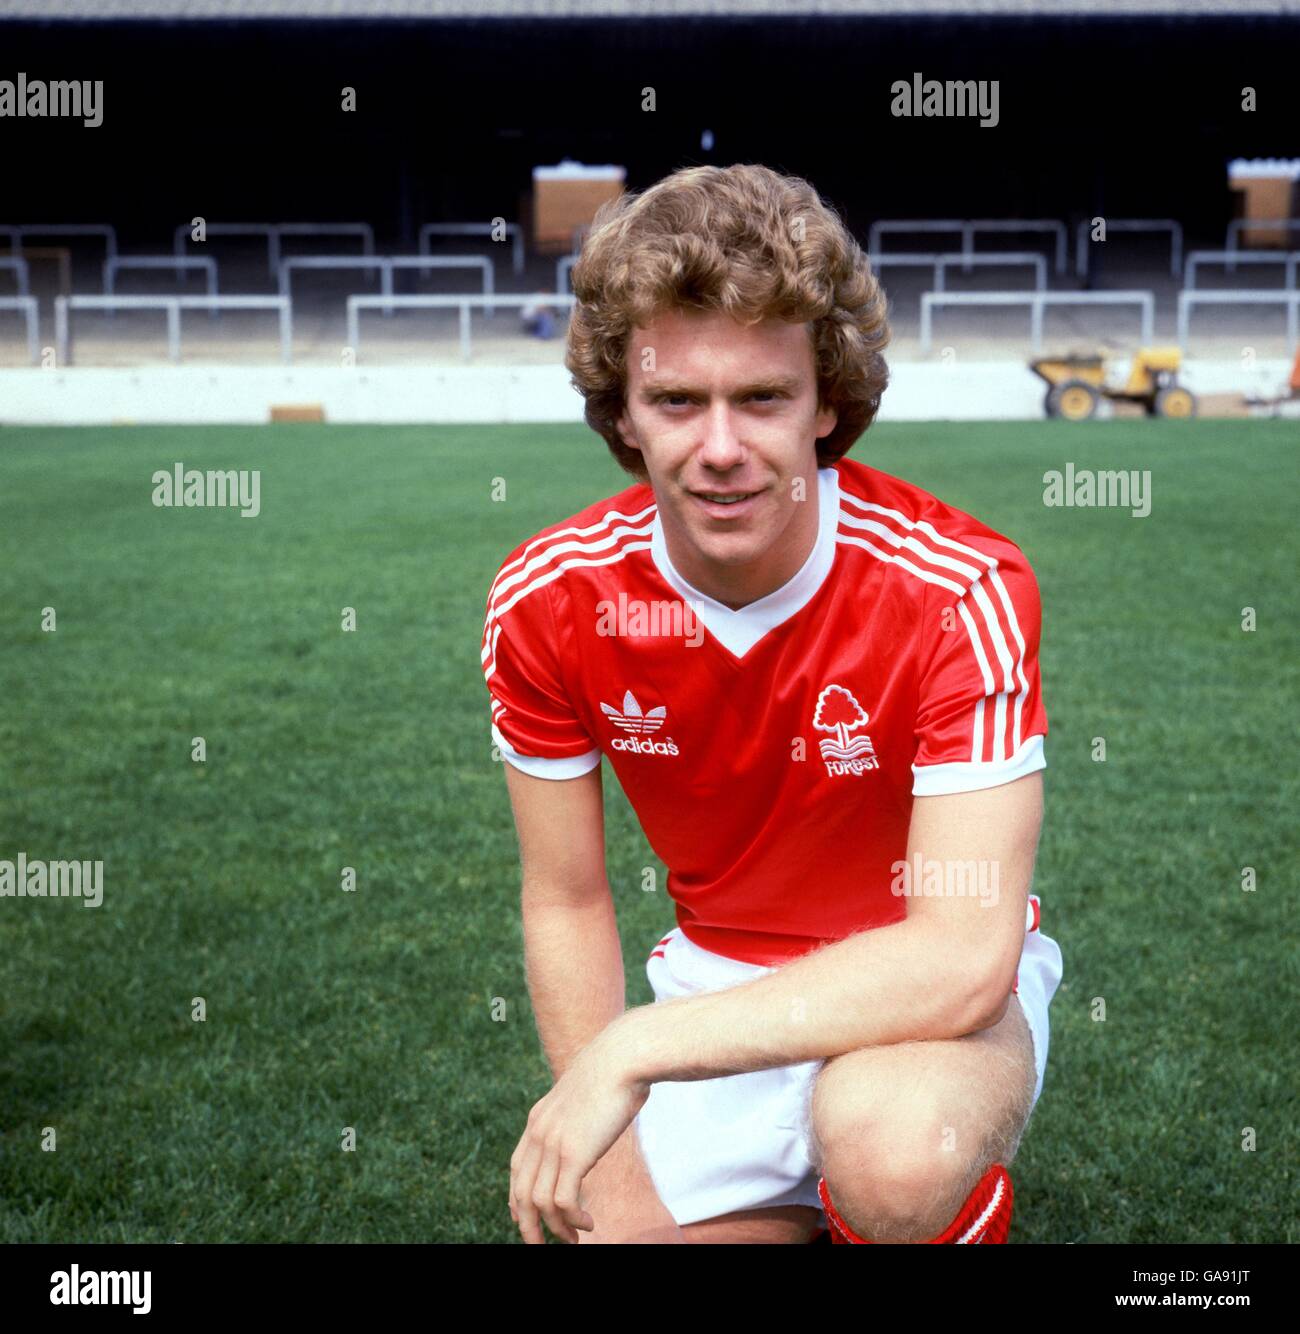 Football - Football League Division One - Nottingham Forest Photocall Banque D'Images